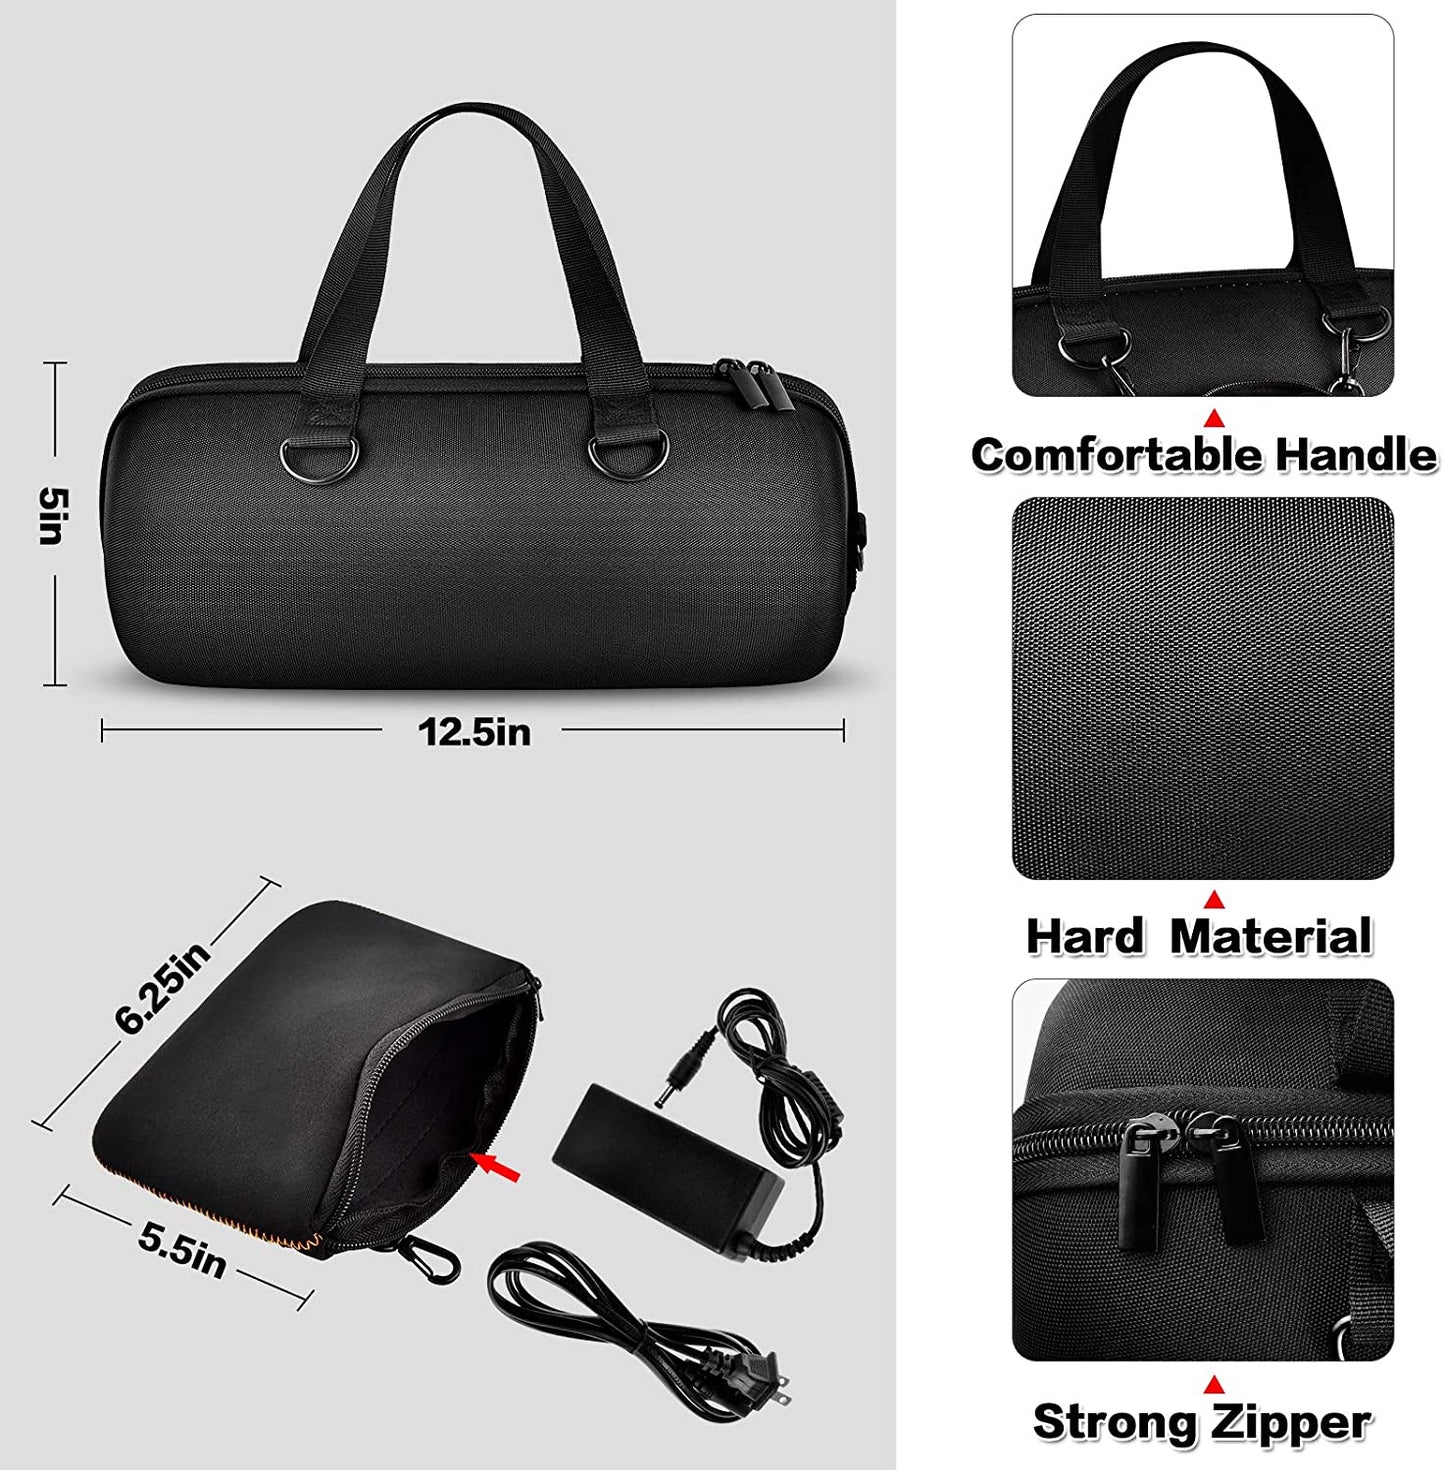 Hard Case for JBL Xtreme 3/ for Extreme 2 Waterproof Portable Bluetooth Speaker, Black Hard Travel Carrying Box for JBL Xtreme Lifestyle Accessories, USB Cable & Charger, Bag Only